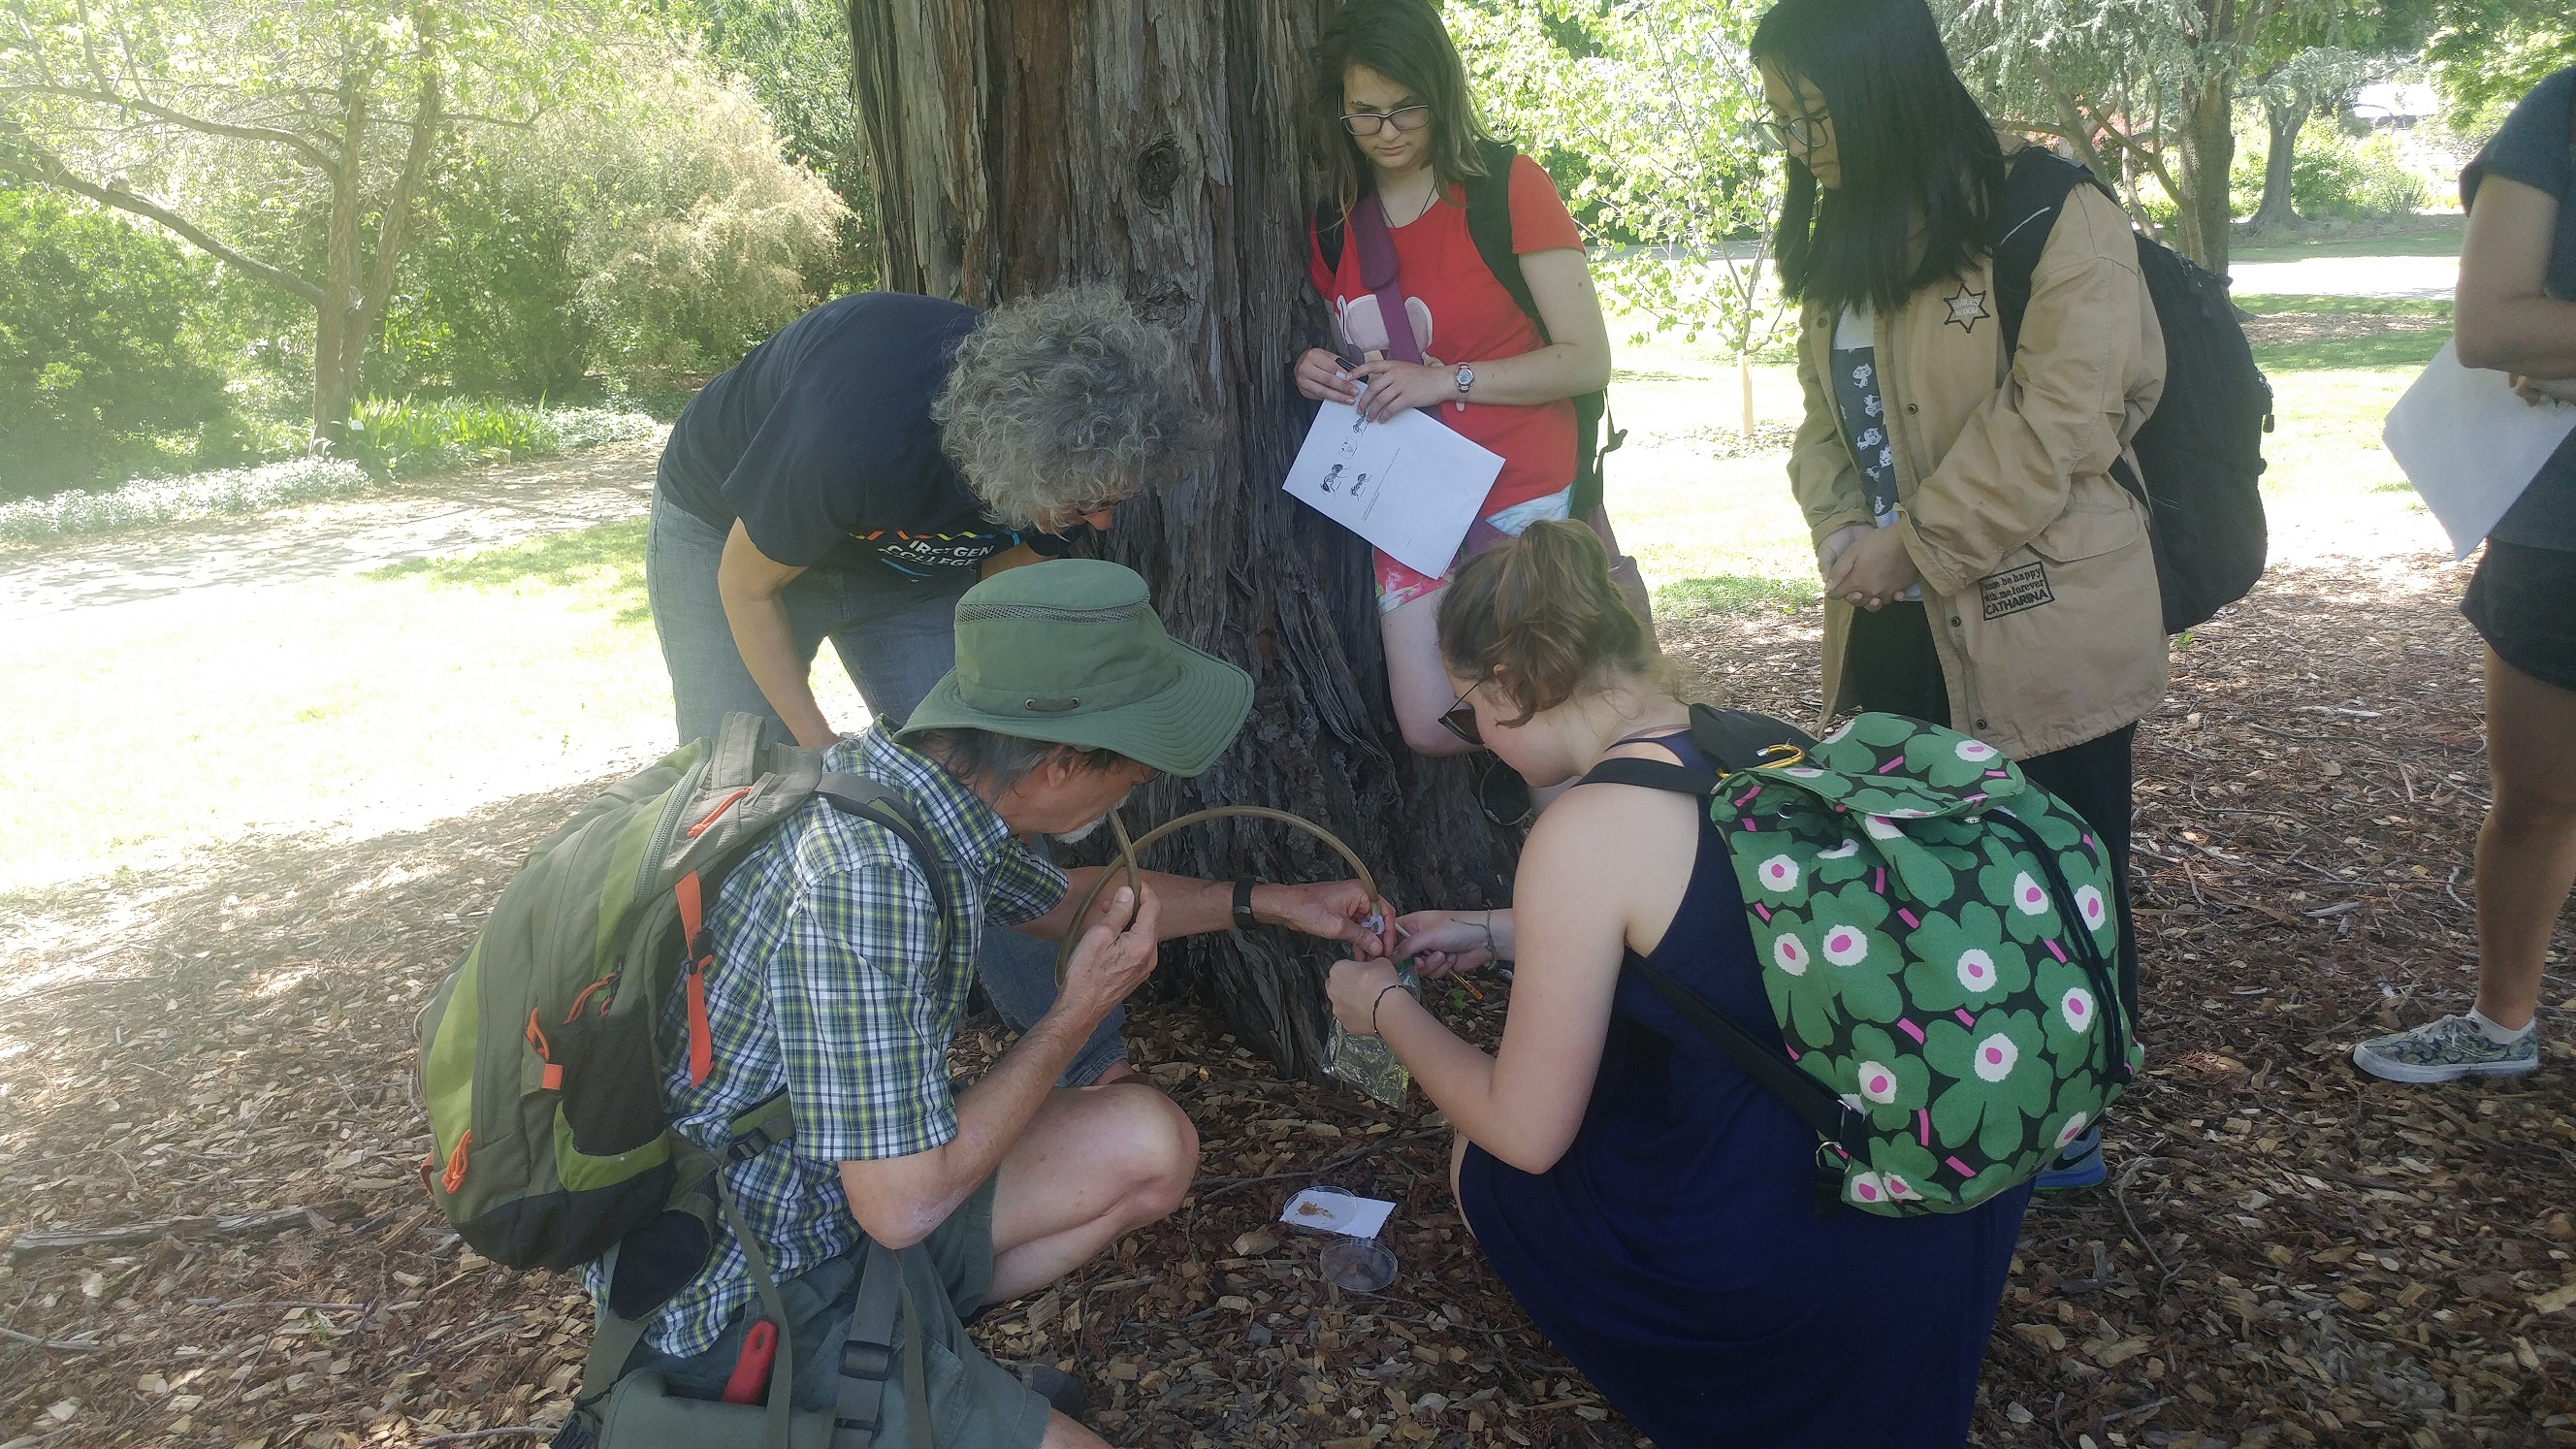 Professor Phil Ward (front left, kneeling) and Ella Brydon (front right, kneeling) use a pooter to collect native ant species in the Arboretum while Professor Sharon Strauss, Isabelle Gilchrist and Xinyu Gao (back, left to right) look on. The collected ants will be contributed to the citizen science program School of Ants. Laci Gerhart-Barley